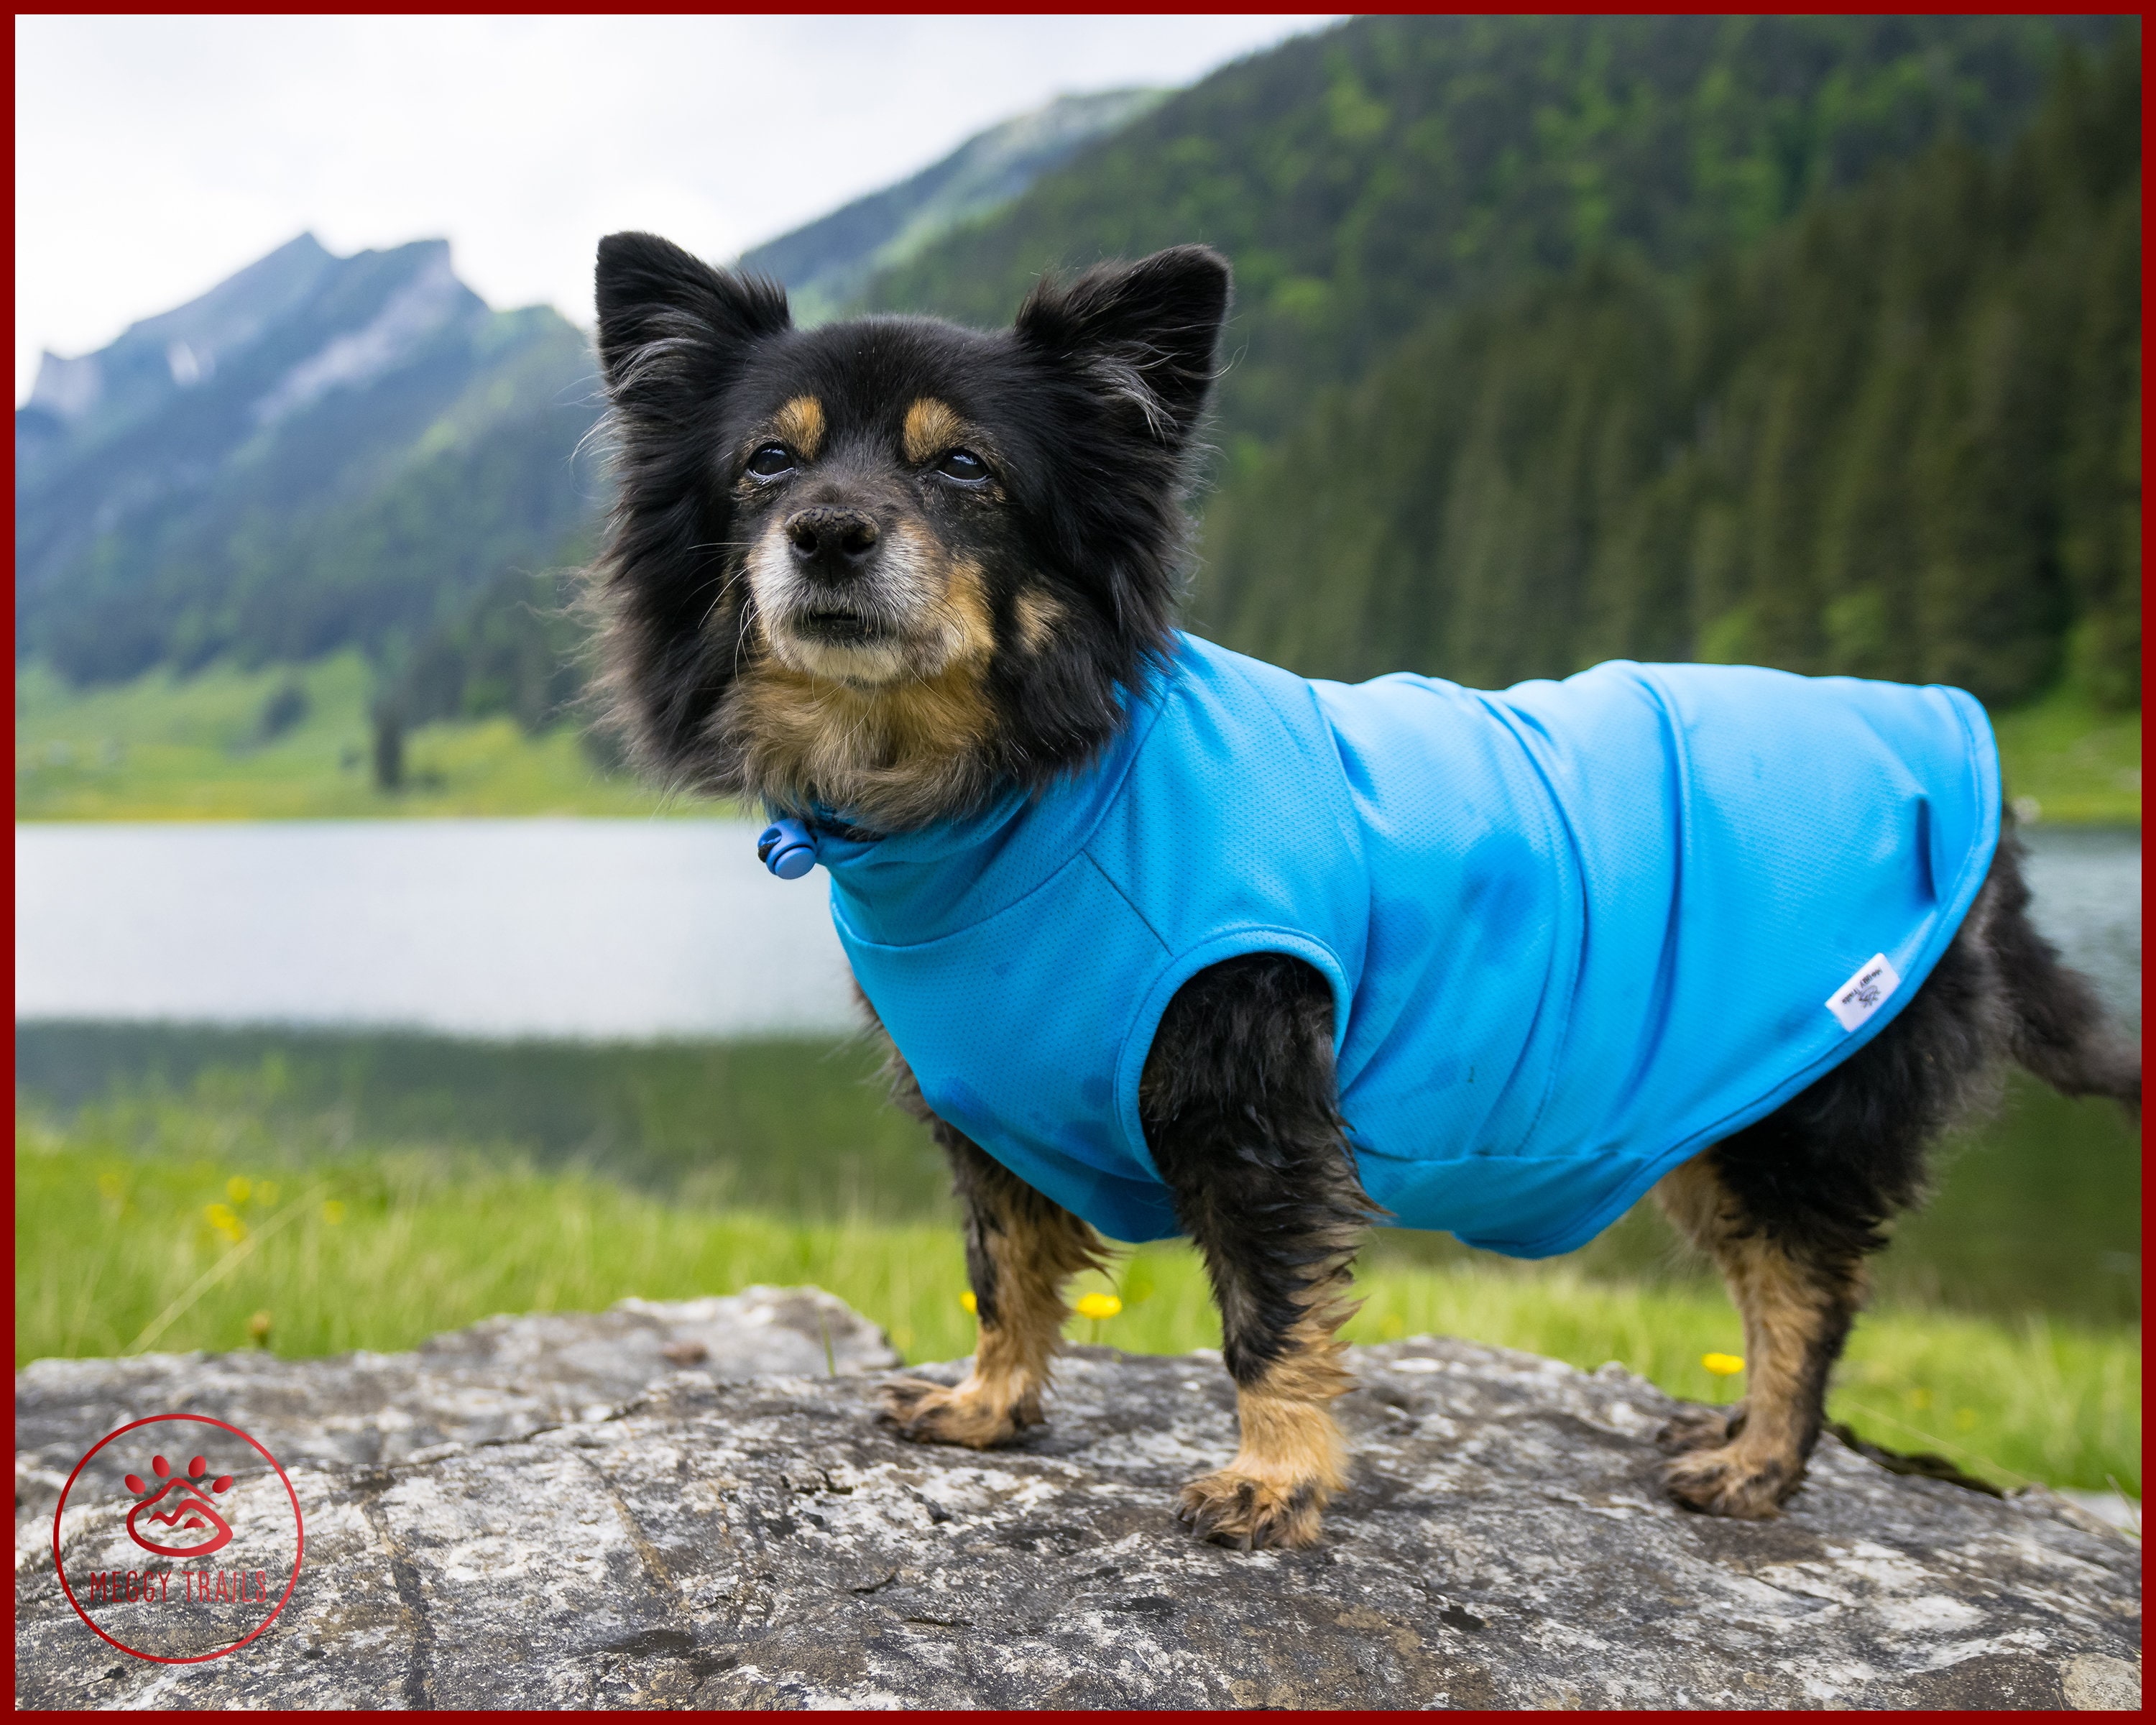  Louie de Coton Sun Shirt for Dogs & Cats, Size: XS, UV  Protection Cooling T-Shirt for Pets, UPF50+ Max Protection from Sunburn